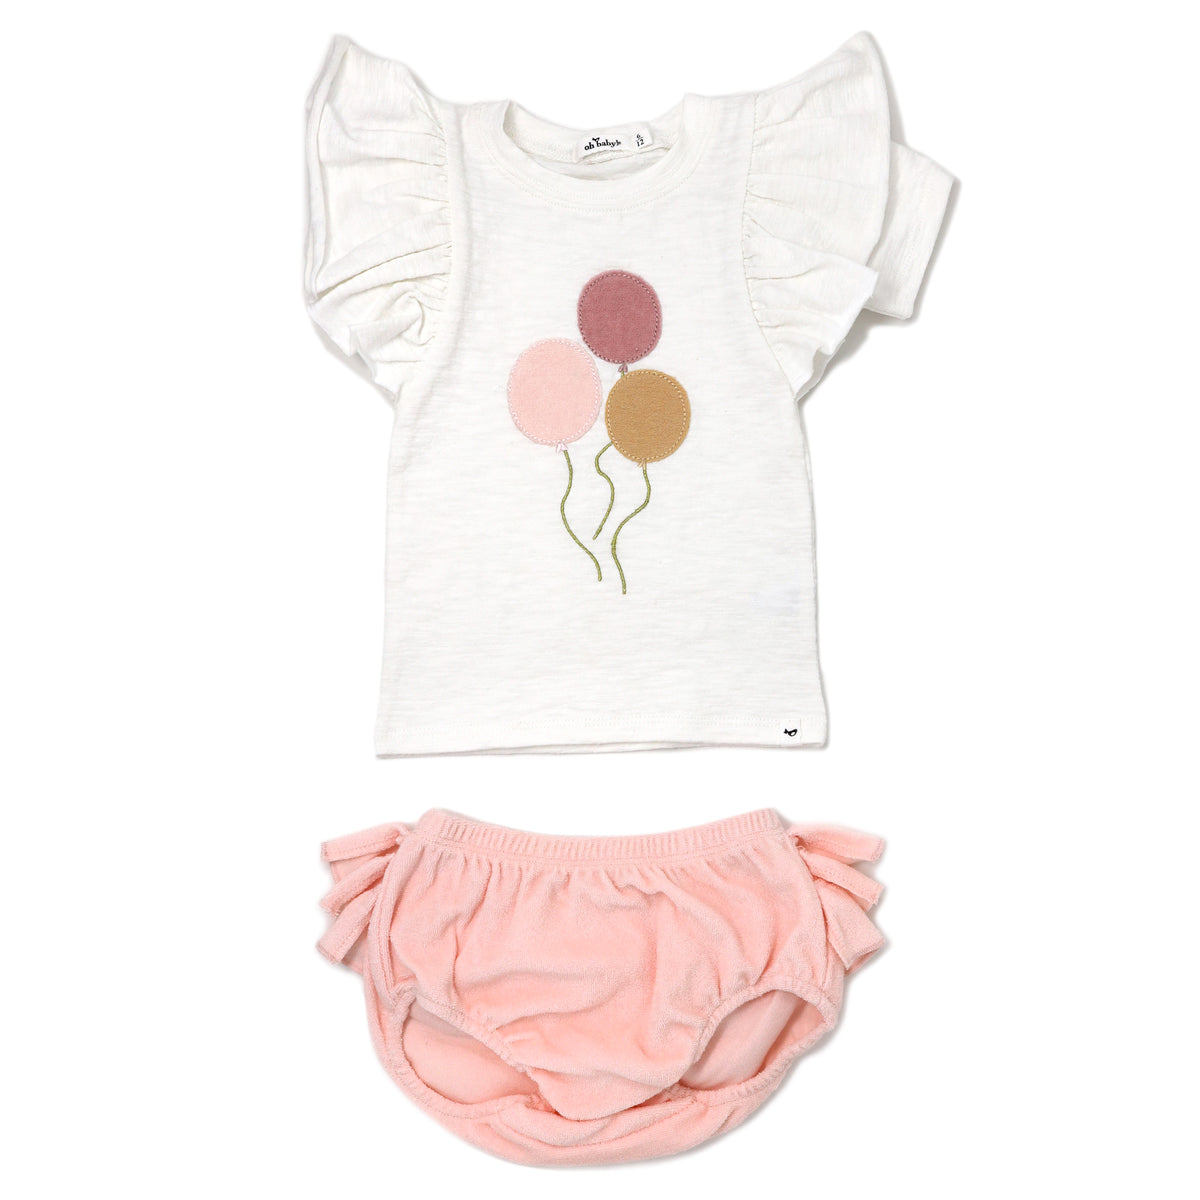 oh baby! Butterfly Sleeve Tee and Terry Ruffle Tushie - Balloon - Pale Pink